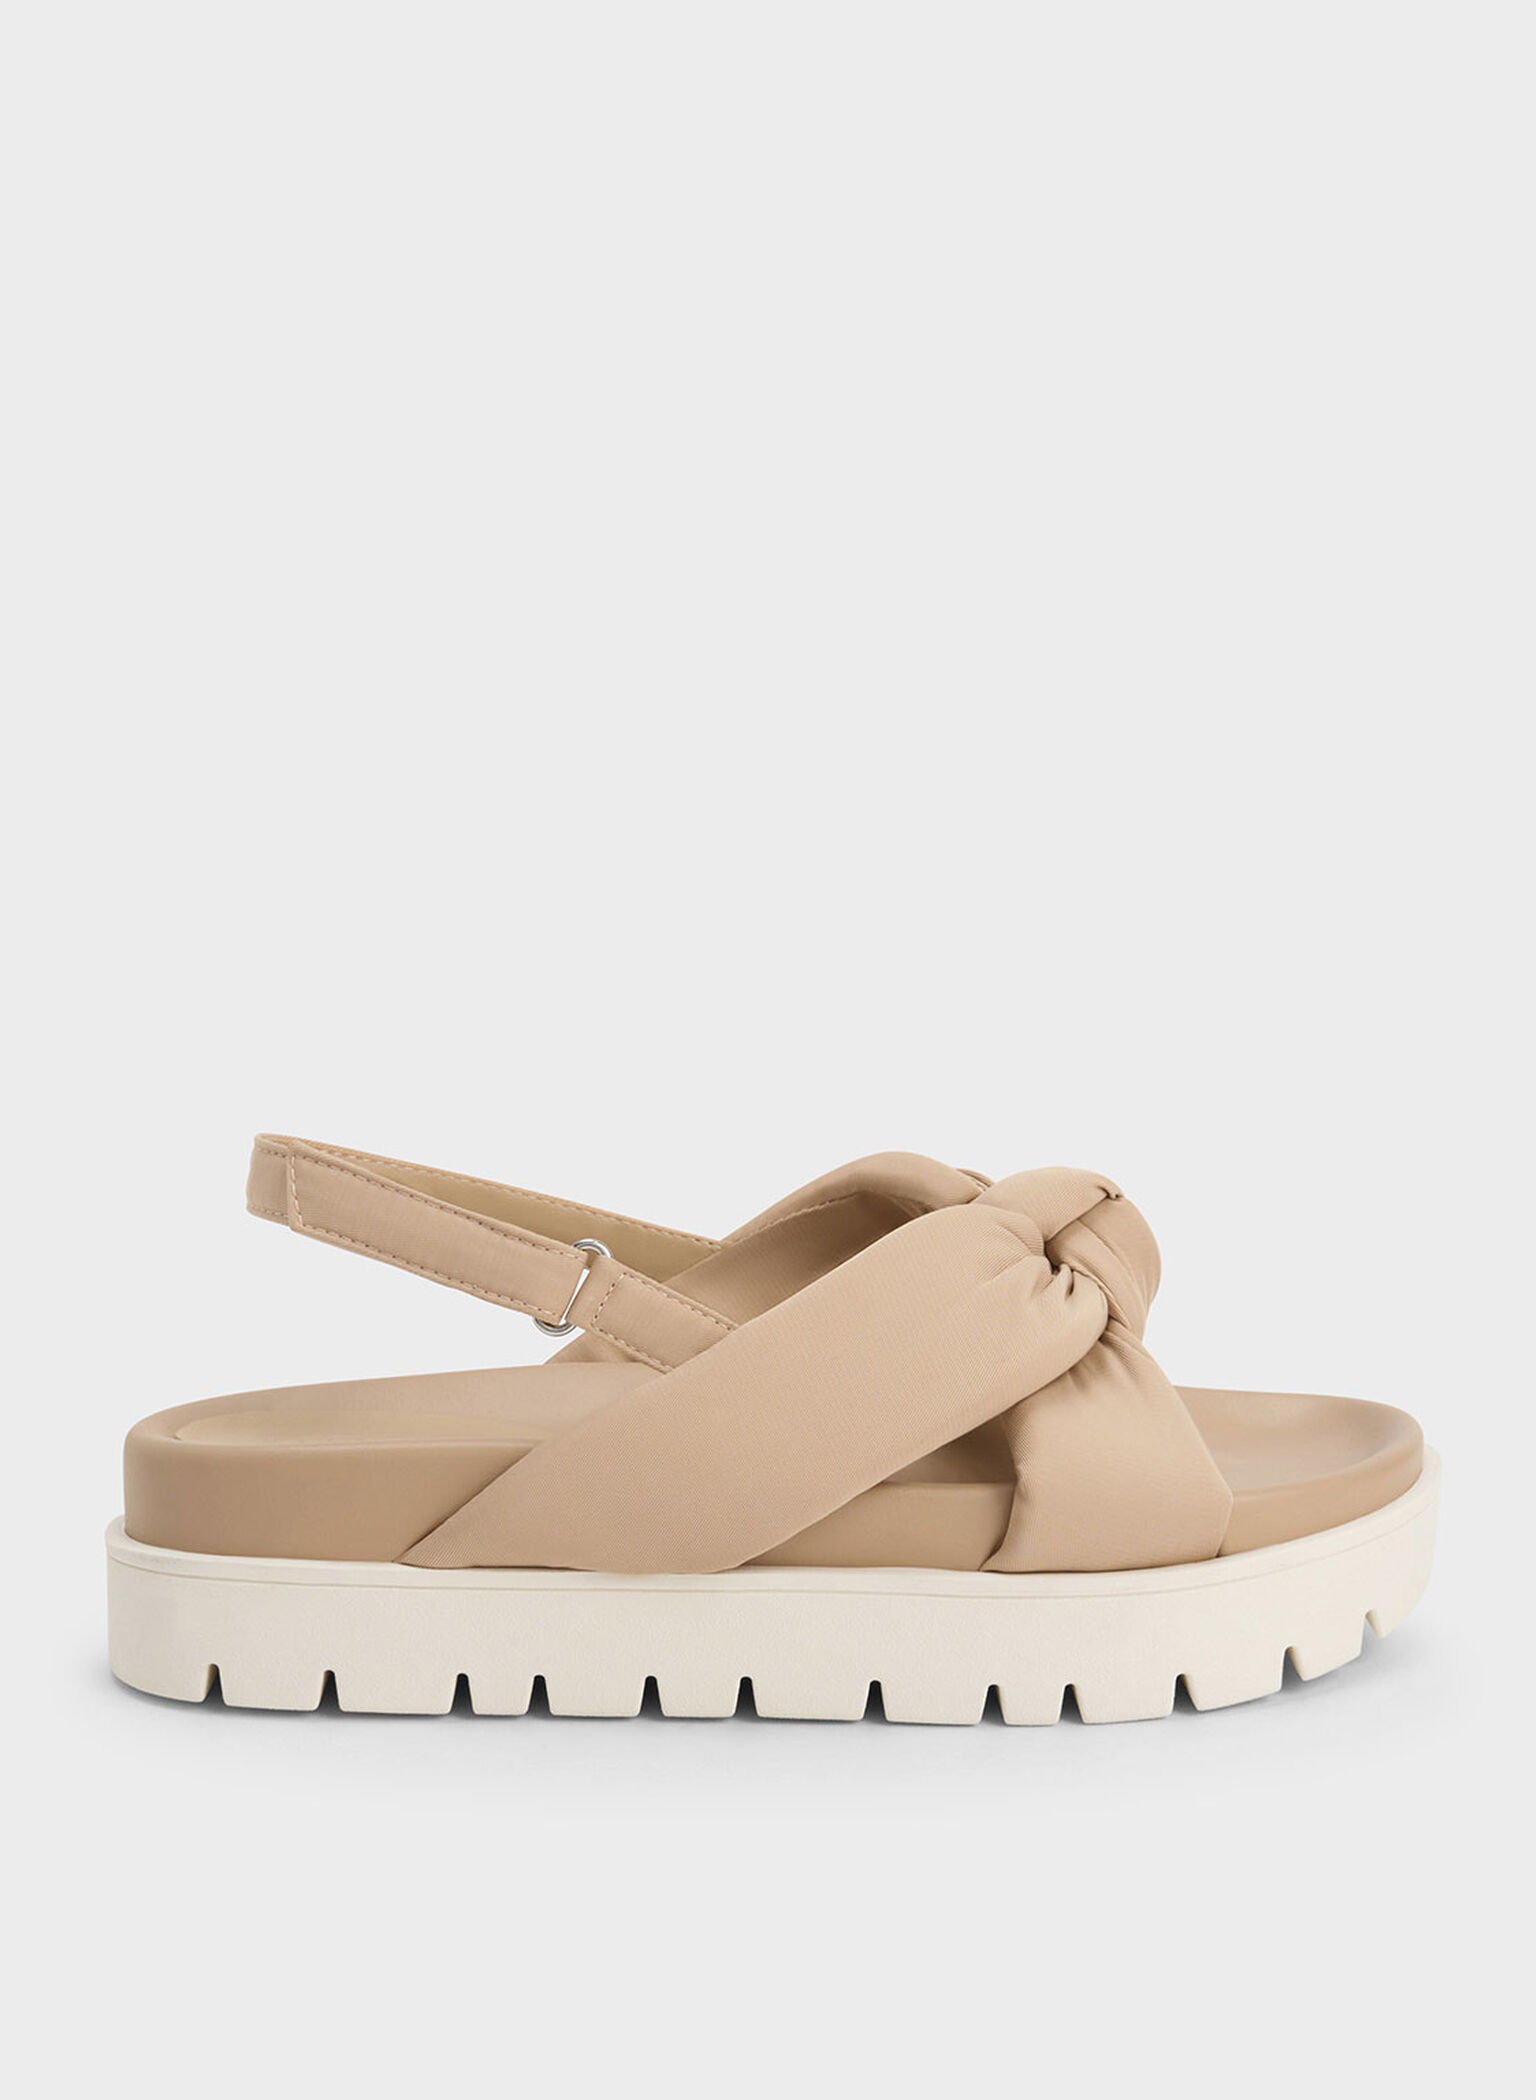 Nude Nylon Knotted Flatform Sandals - CHARLES & KEITH US